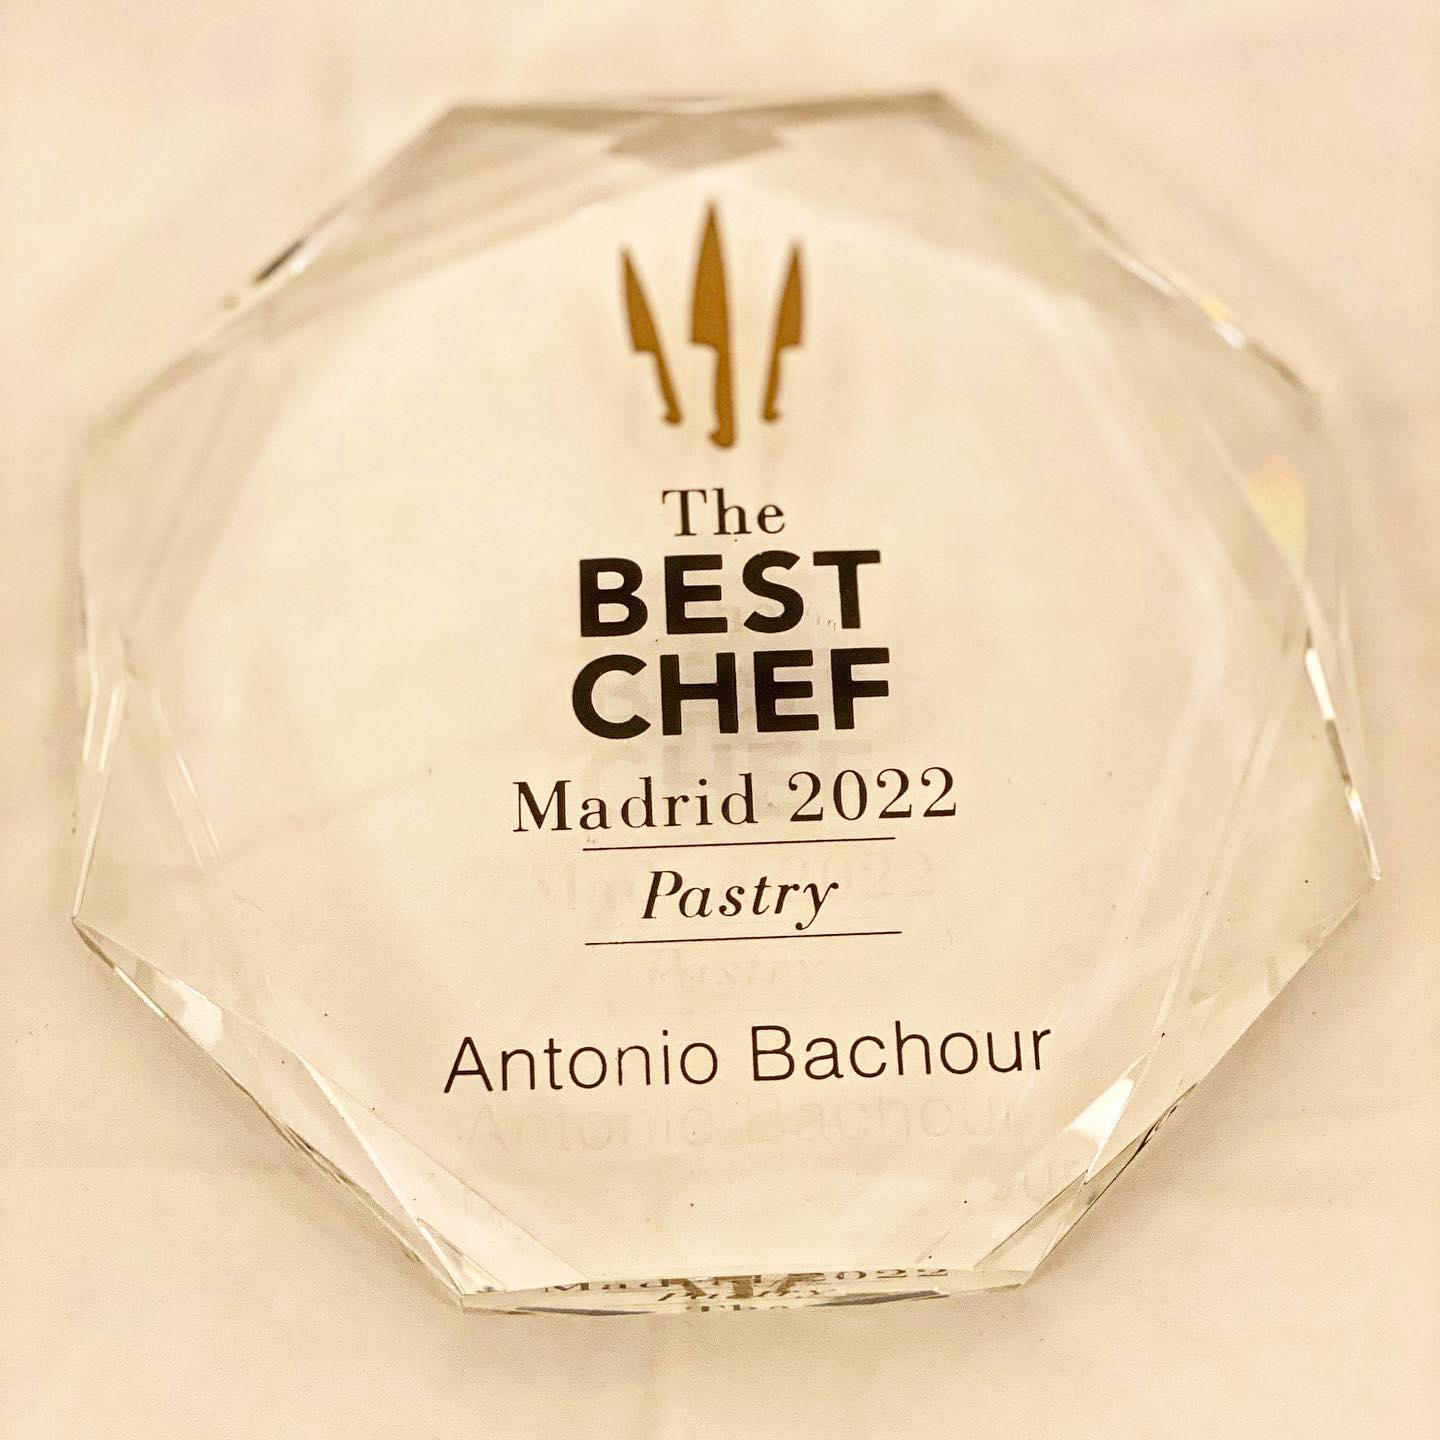 image  1 Antonio Bachour - Tonight I received the recognition of the Best Pastry Chef of the world 2022, also